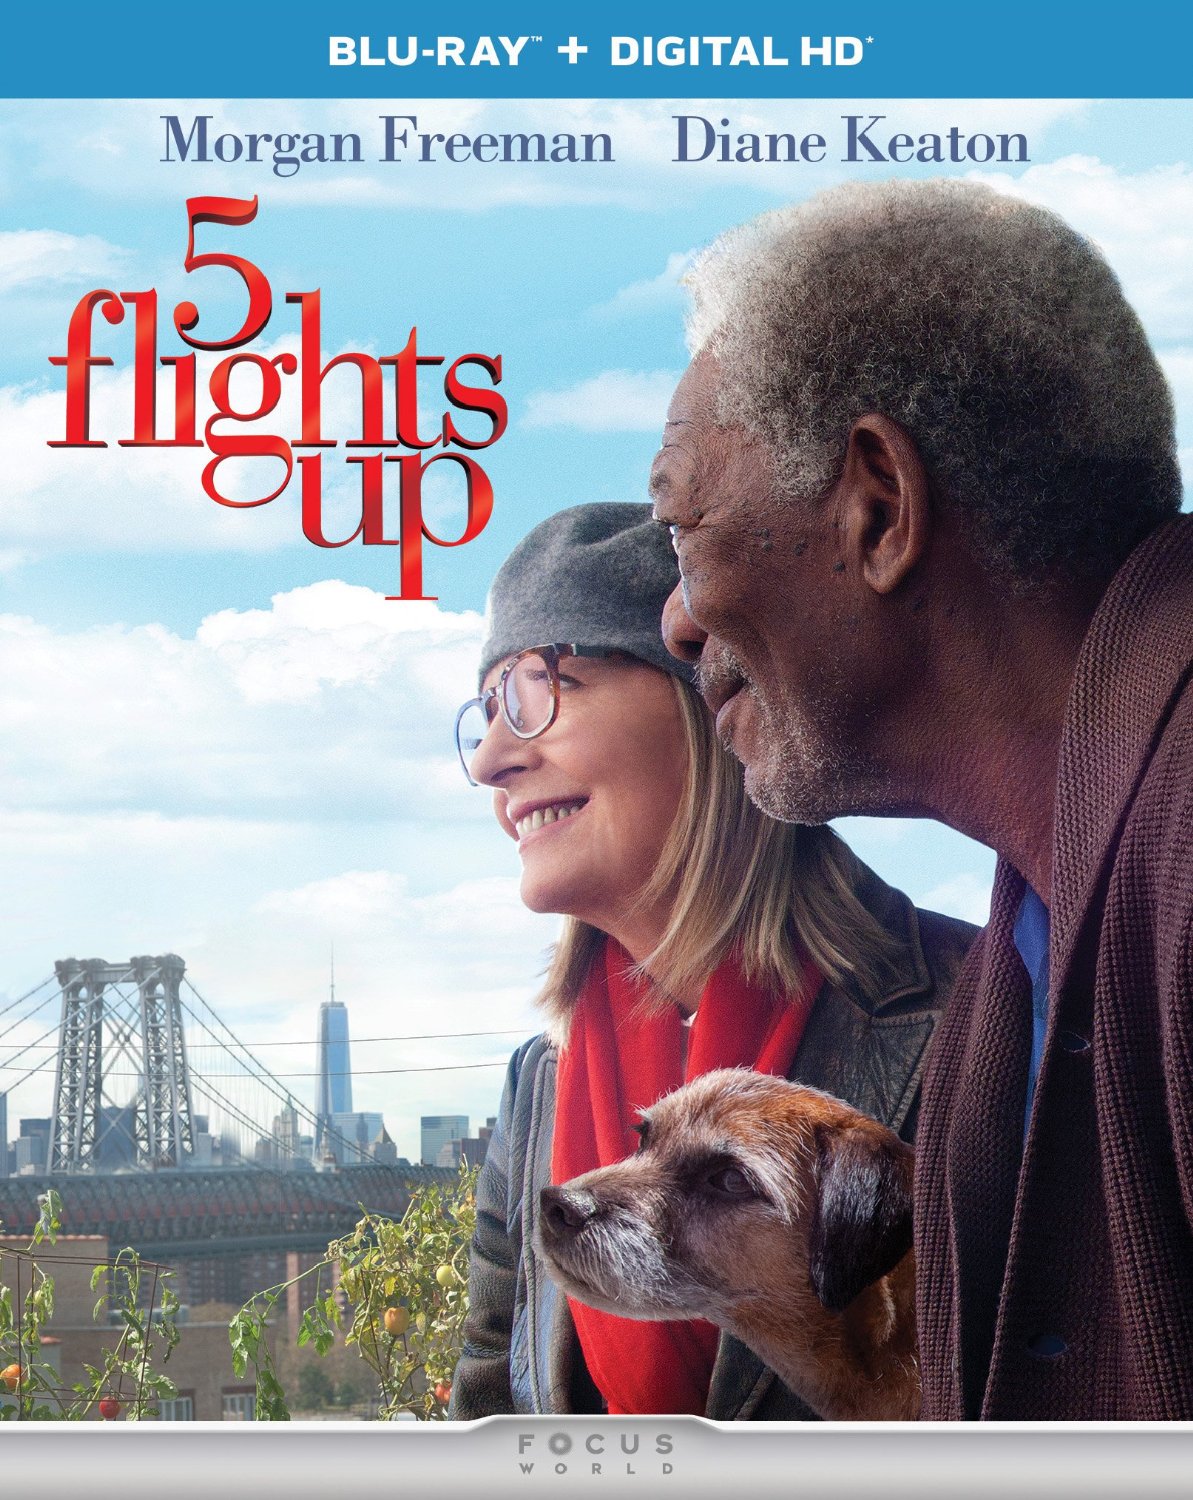 5 Flights Up Blu-ray Review